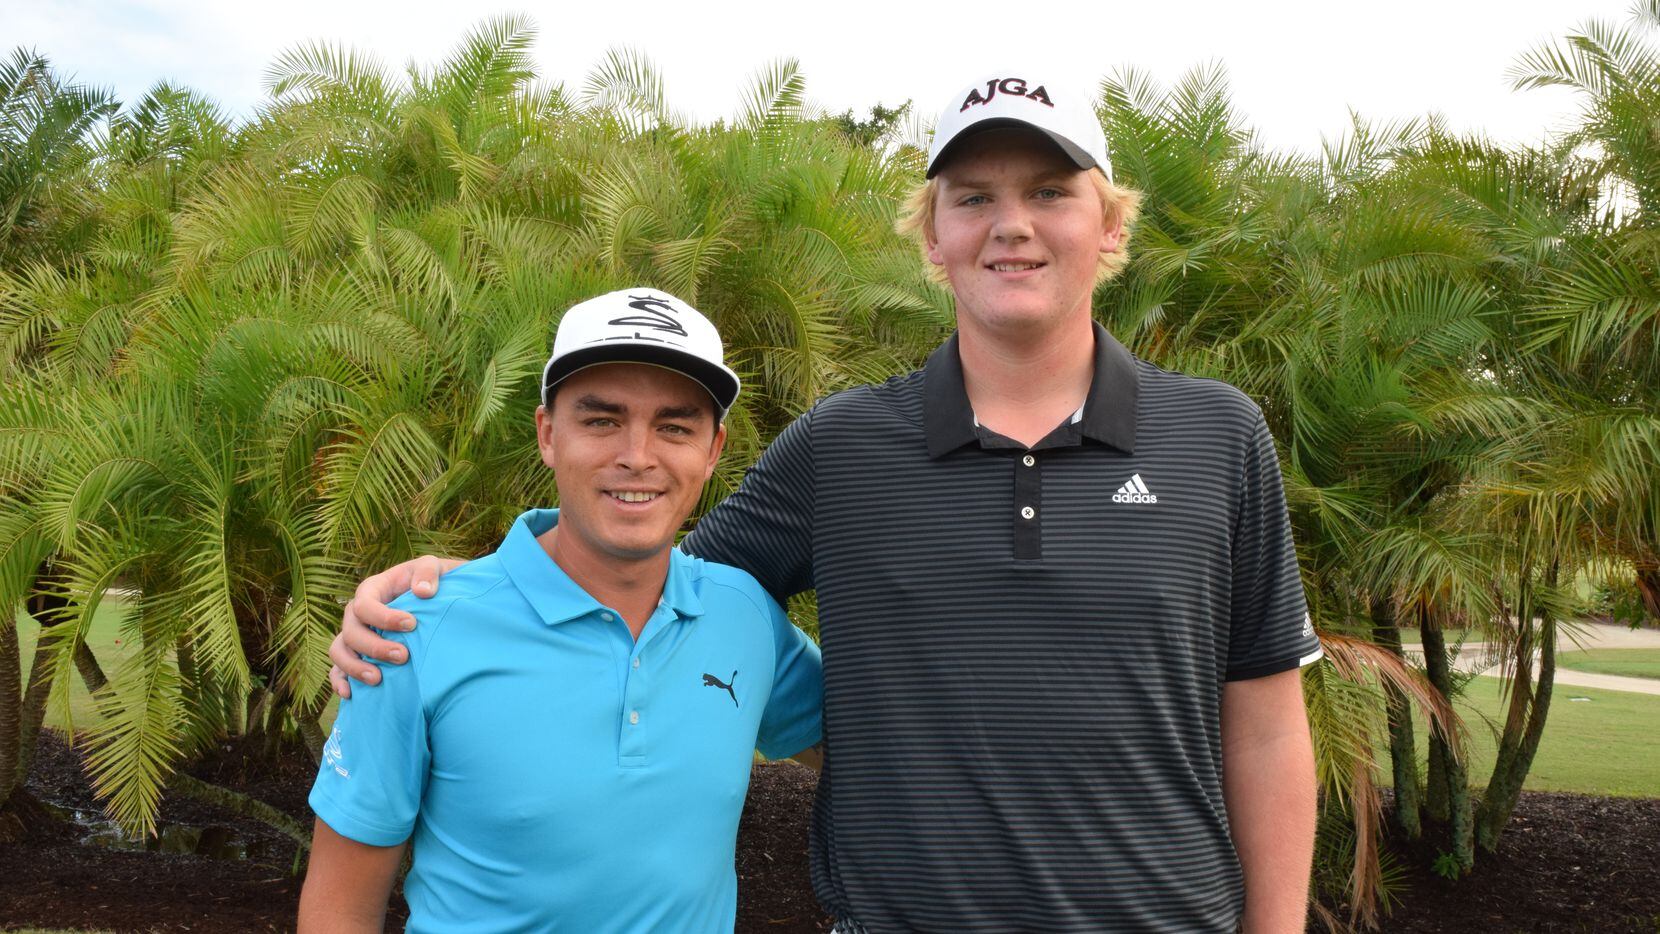 Tommy Morrison of Dallas (right), posing with PGA Tour player Rickie Fowler, was named...